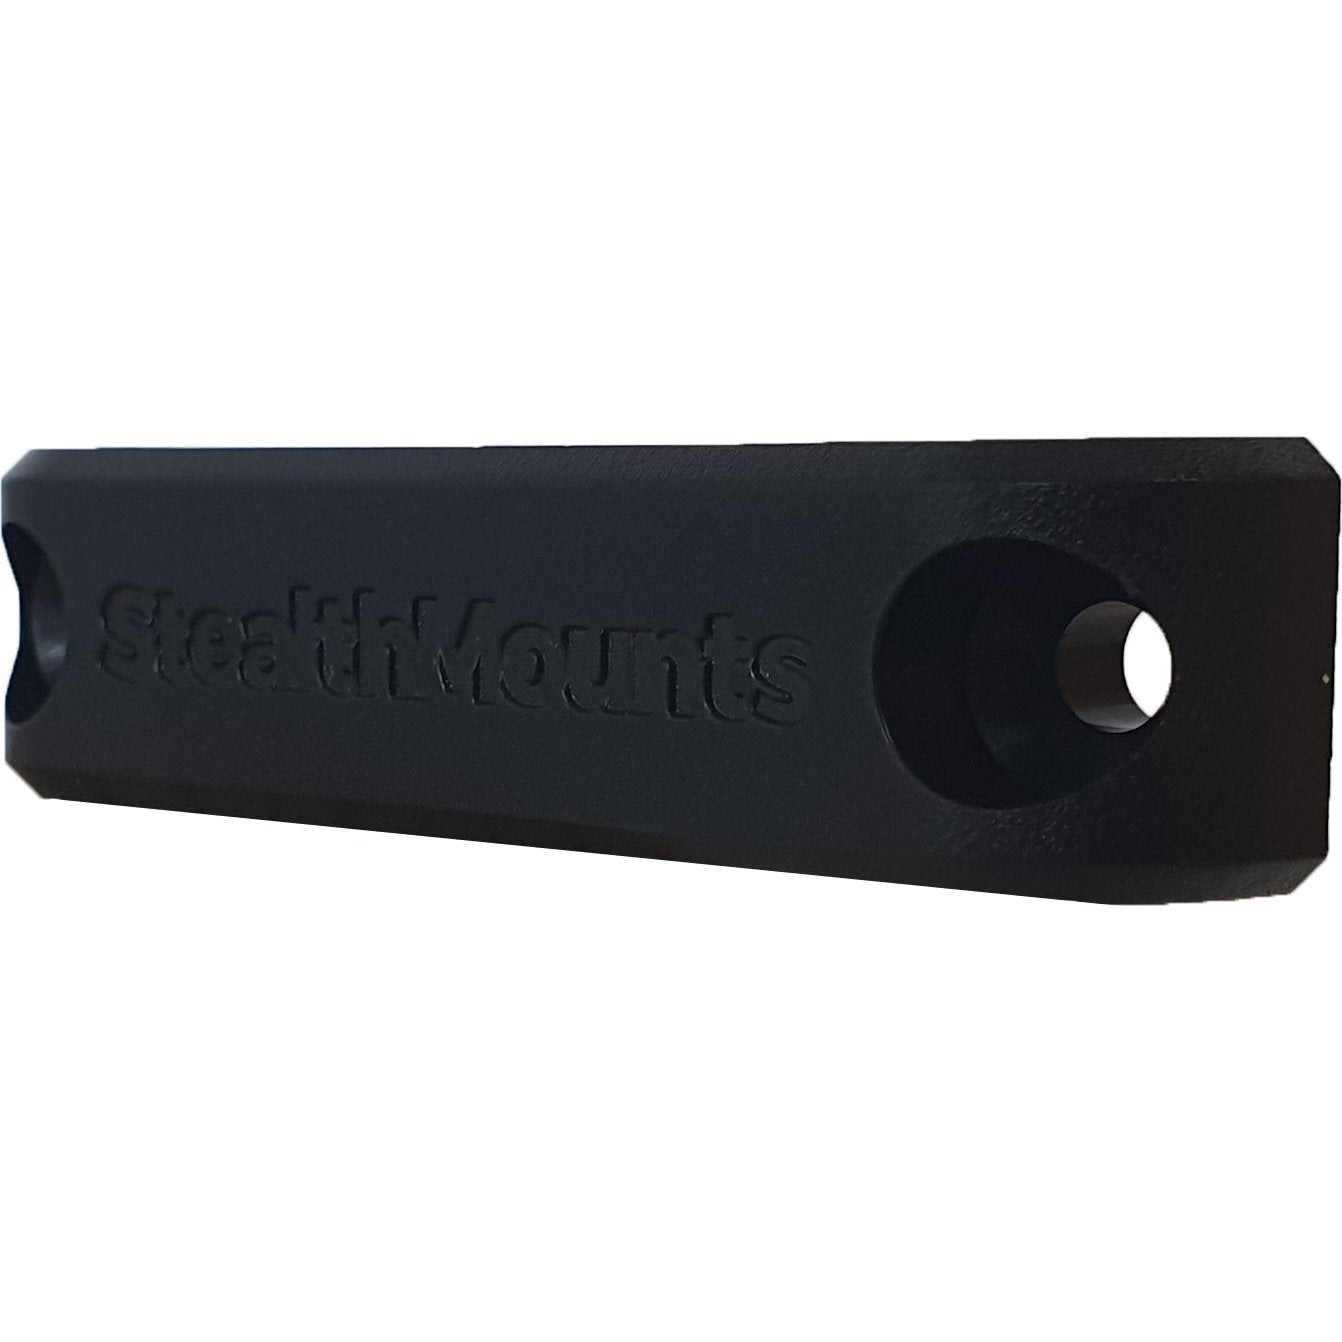 Universal Bench Belts XL 6-pack, StealthMounts - distribution wholesale and  retail. - Bitmag official store